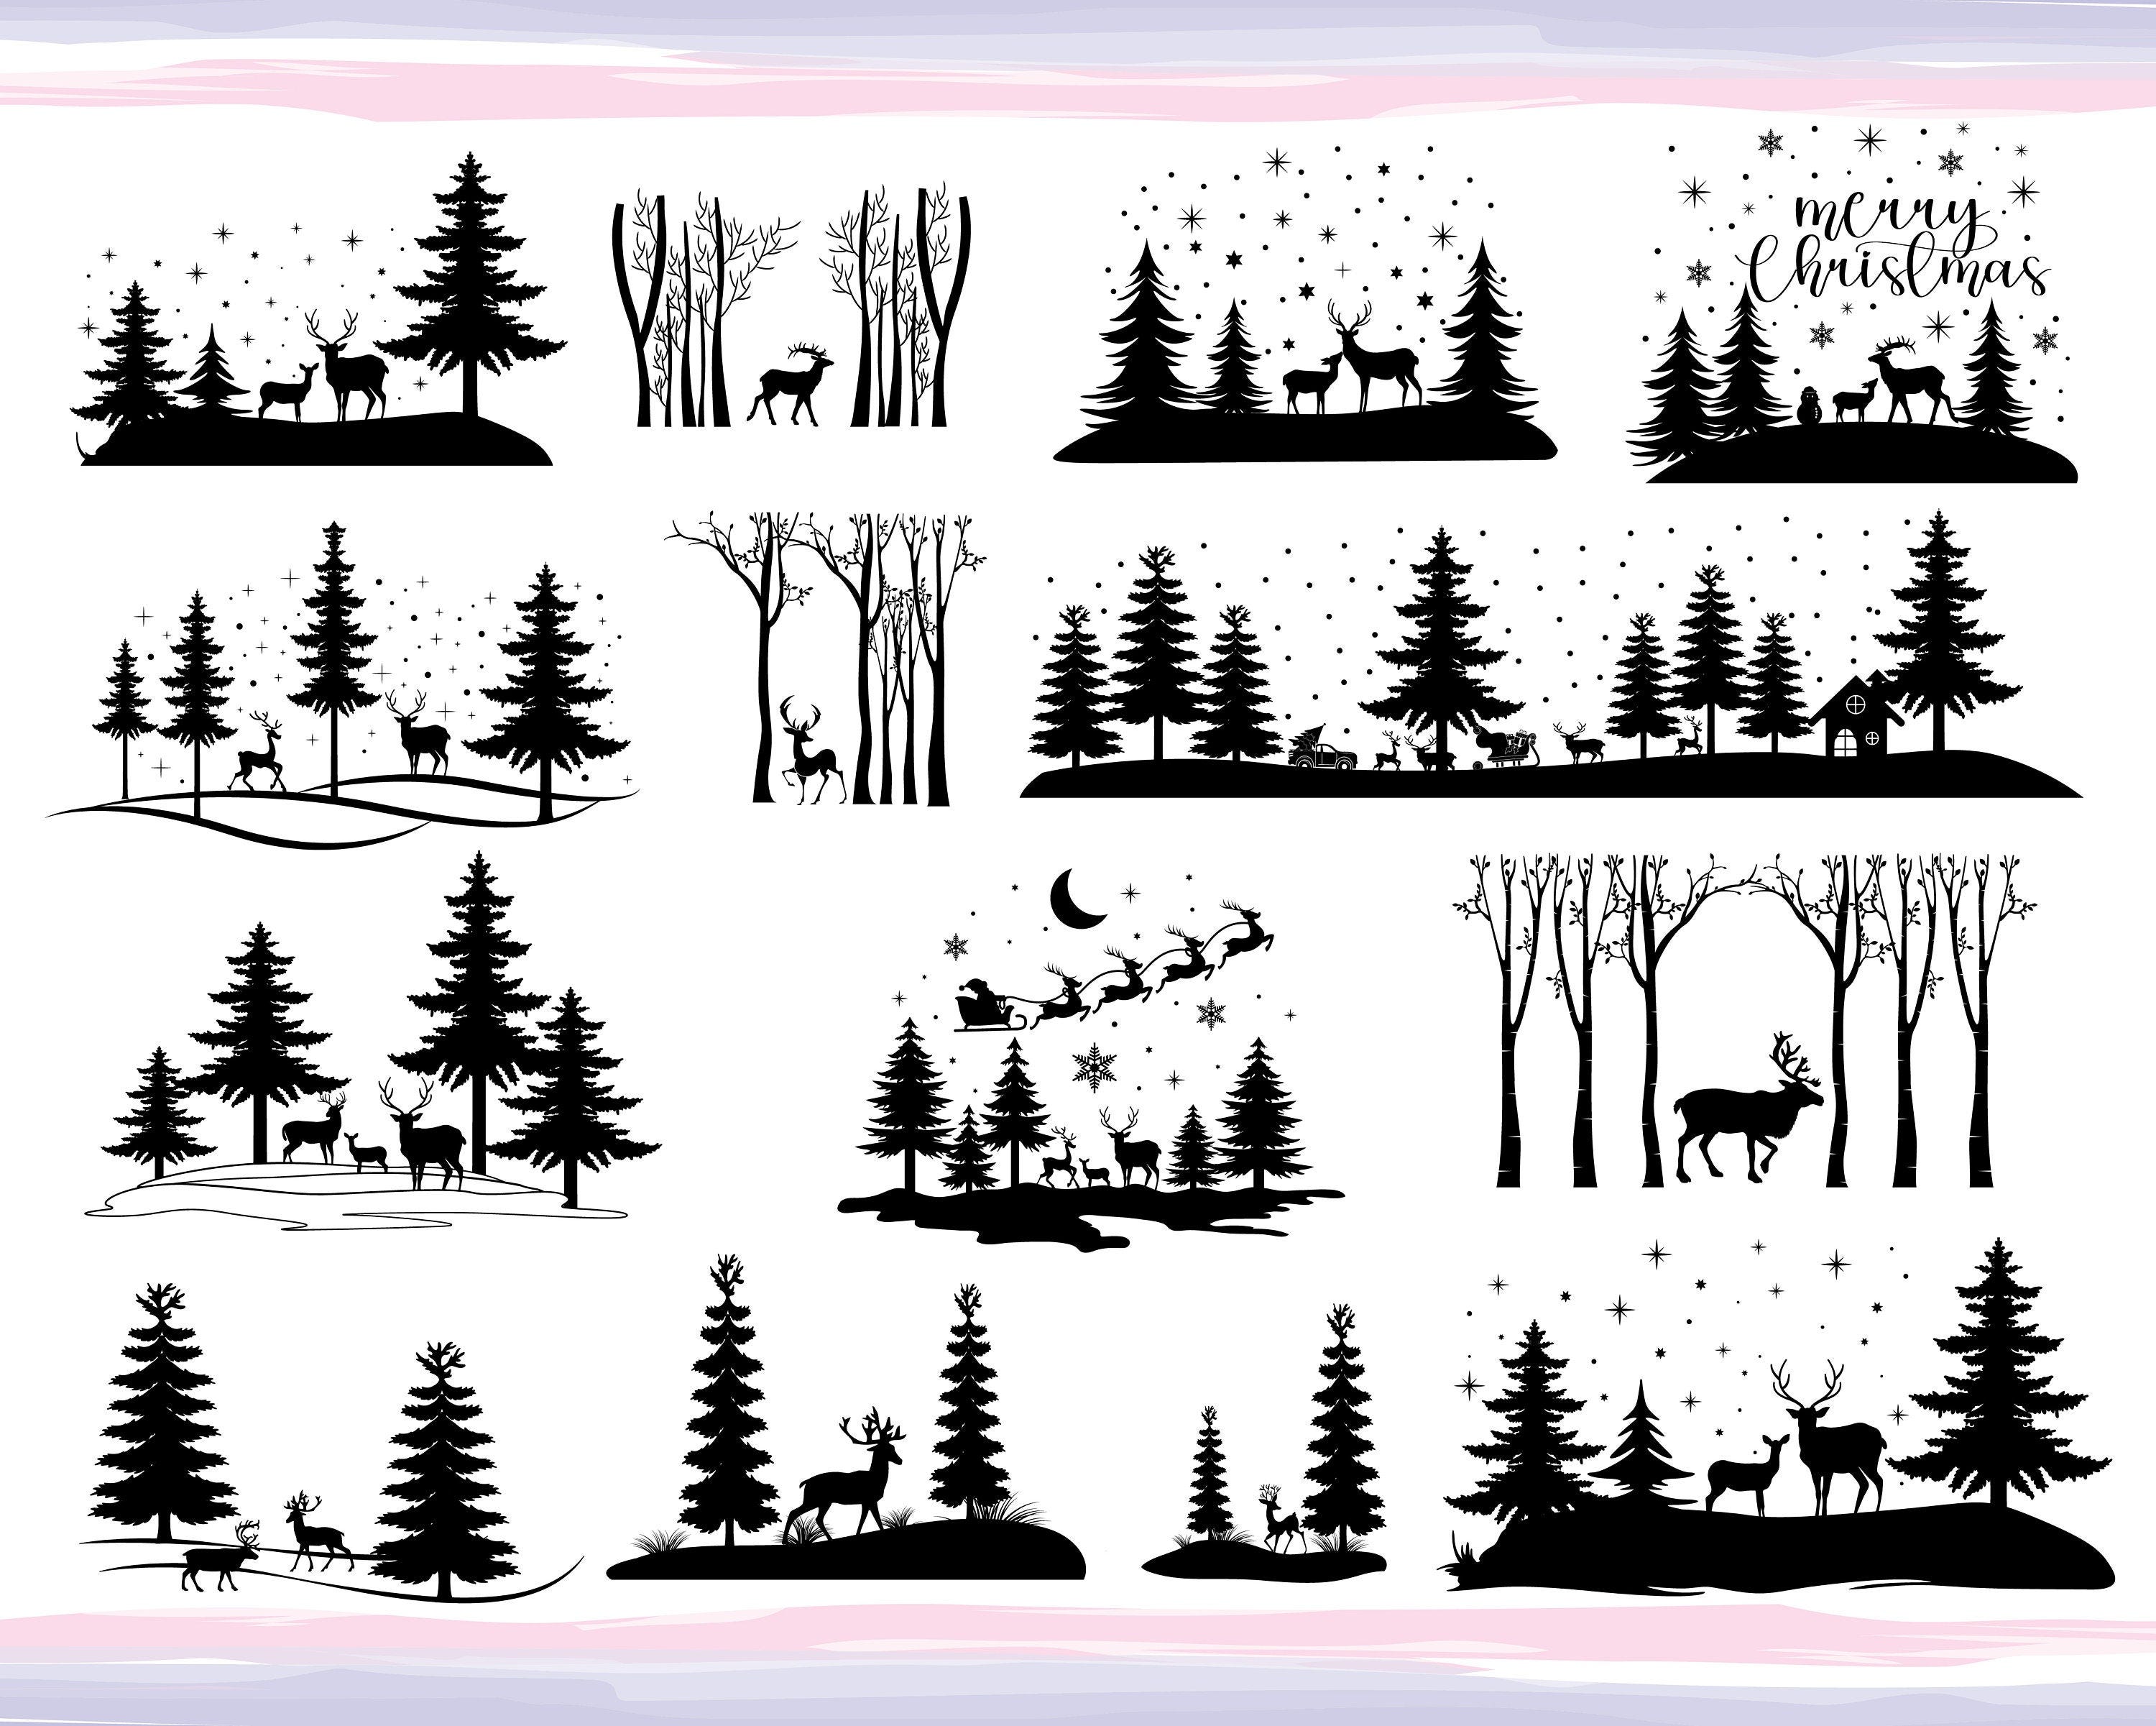 Winter Christmas Scene SVG | Magical Christmas Scene | Deer svg | Pine Tree | Winter forest svg | Snowy Forest | Magic Winer svg,png,dxf.eps